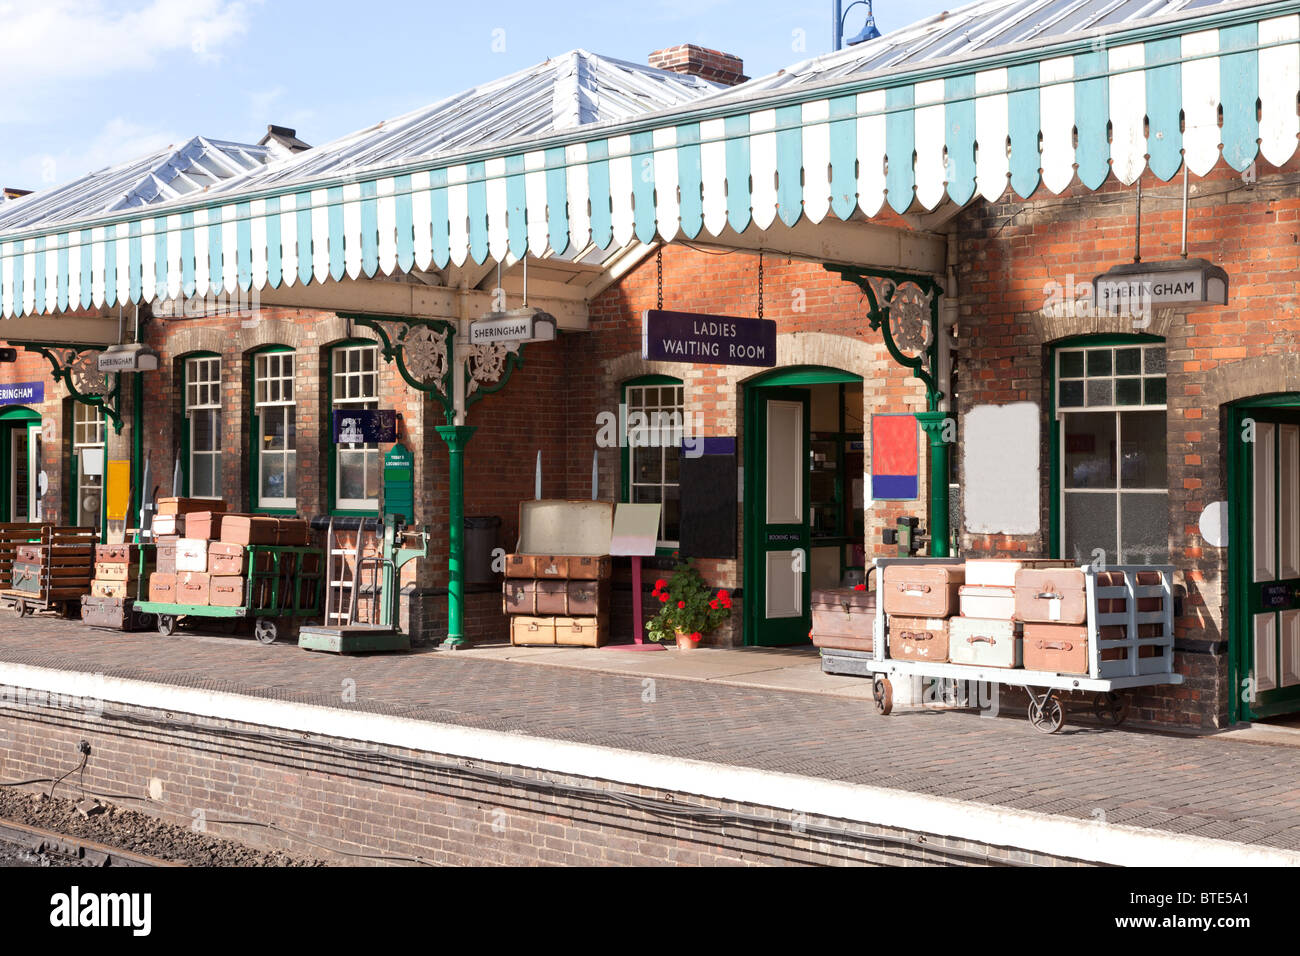 Old fashioned railway station with traditional luggage trollies and old style suitcases at Sheringham, Norfolk, England Stock Photo